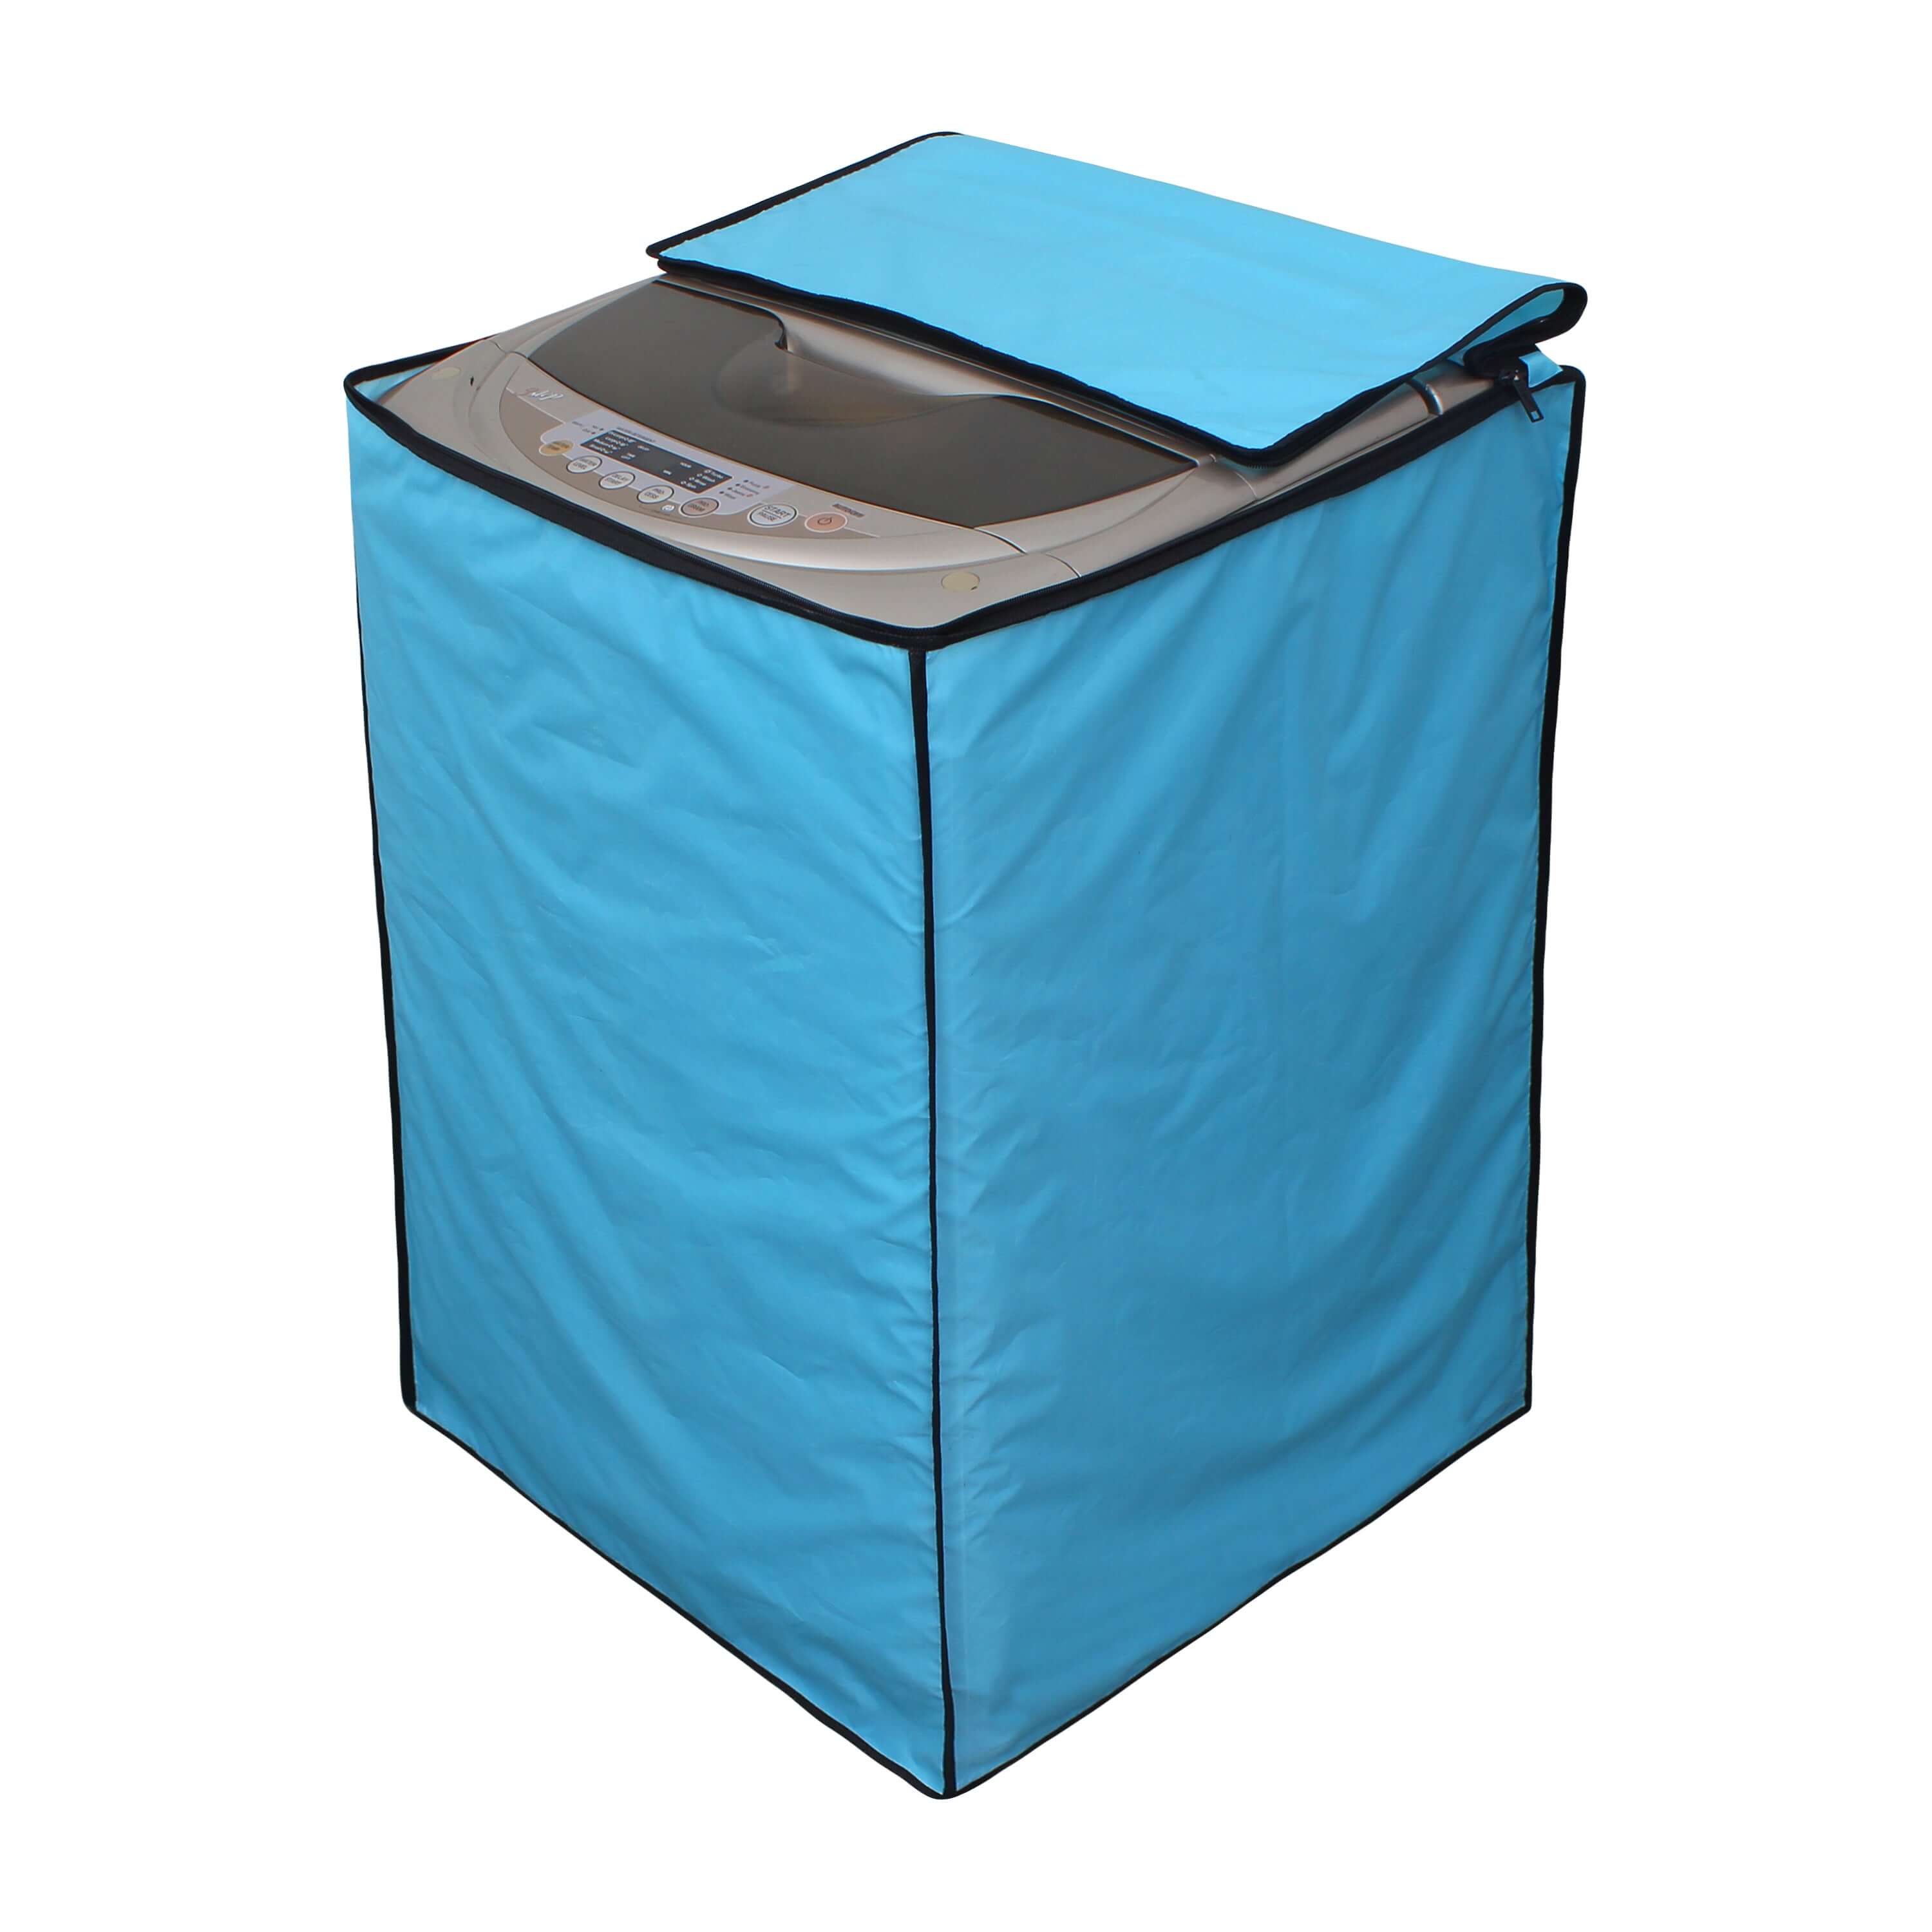 Fully Automatic Top Load Washing Machine Cover, Sky Blue